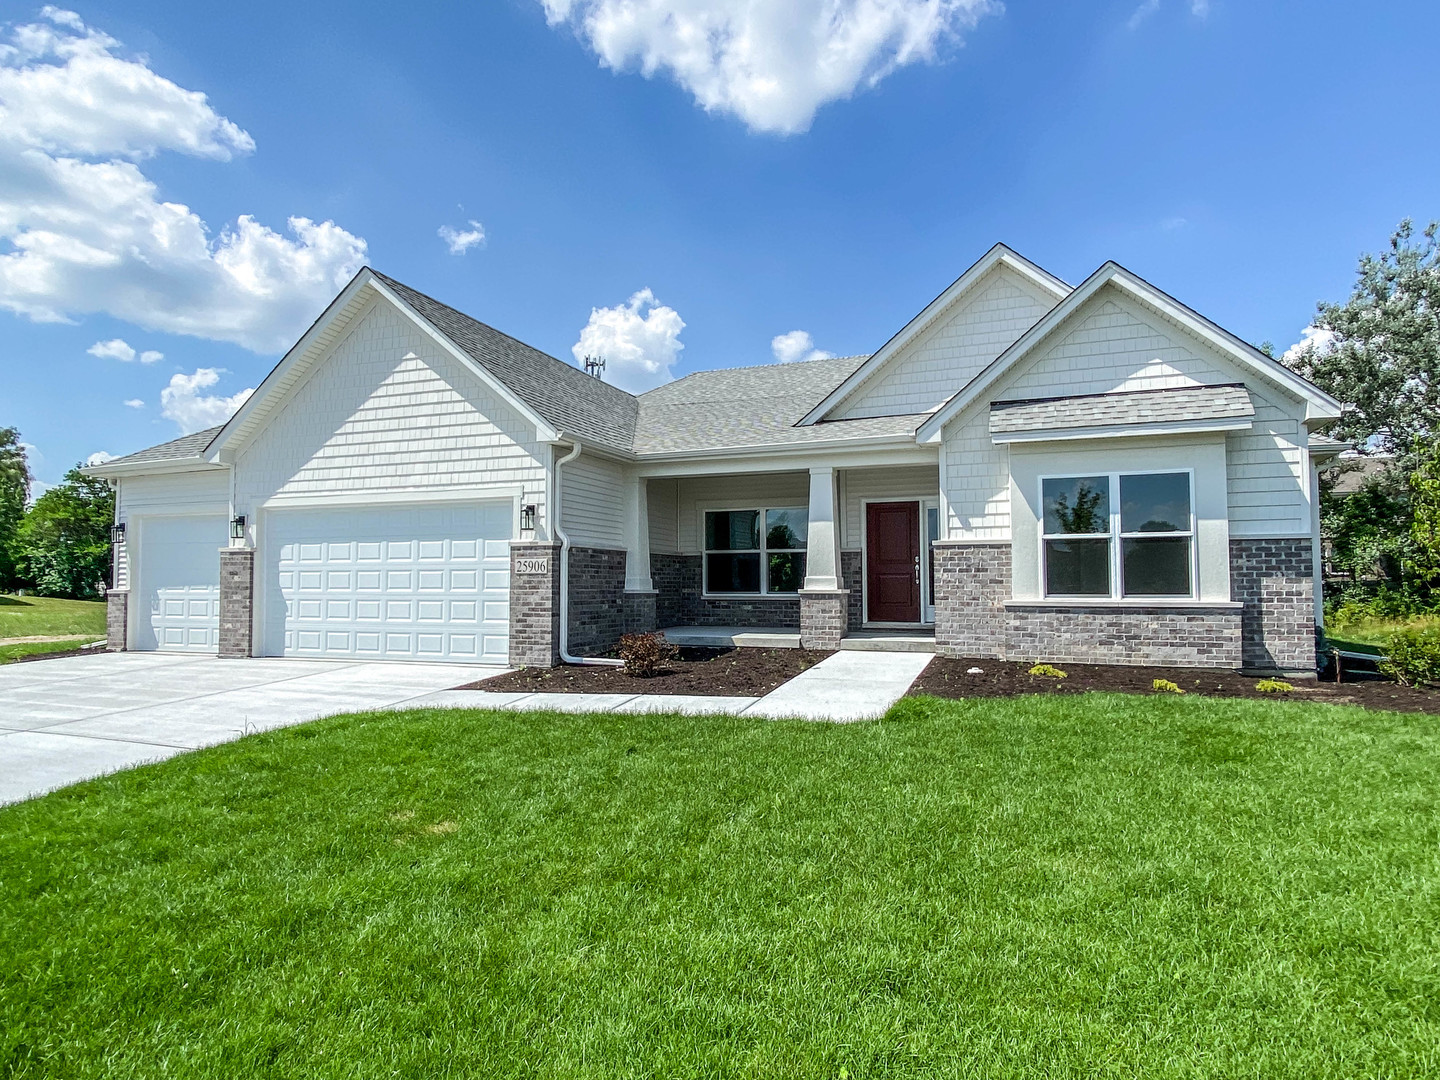 Creekside Crossing in Plainfield IL Homes for Sale - Creekside Crossing ...